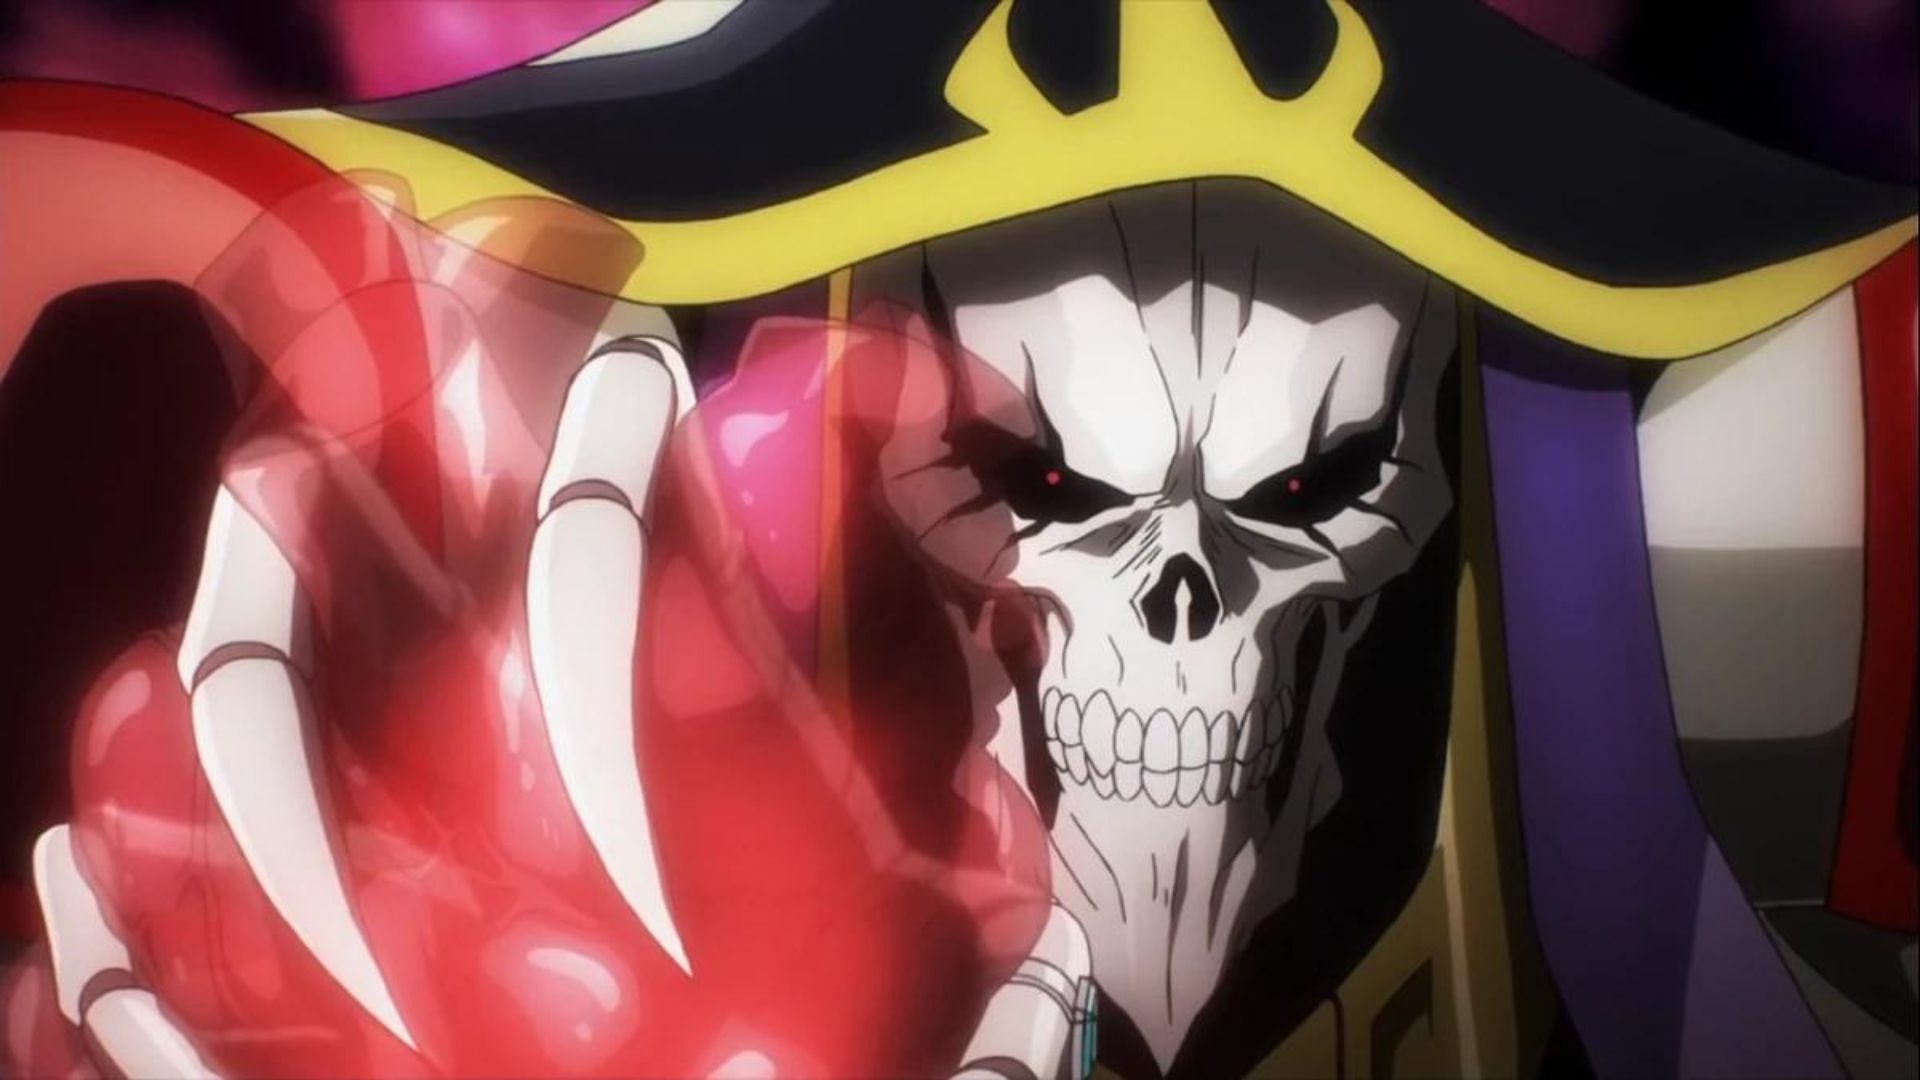 Ainz Ooal Gown as seen in the anime (Image via Madhouse)